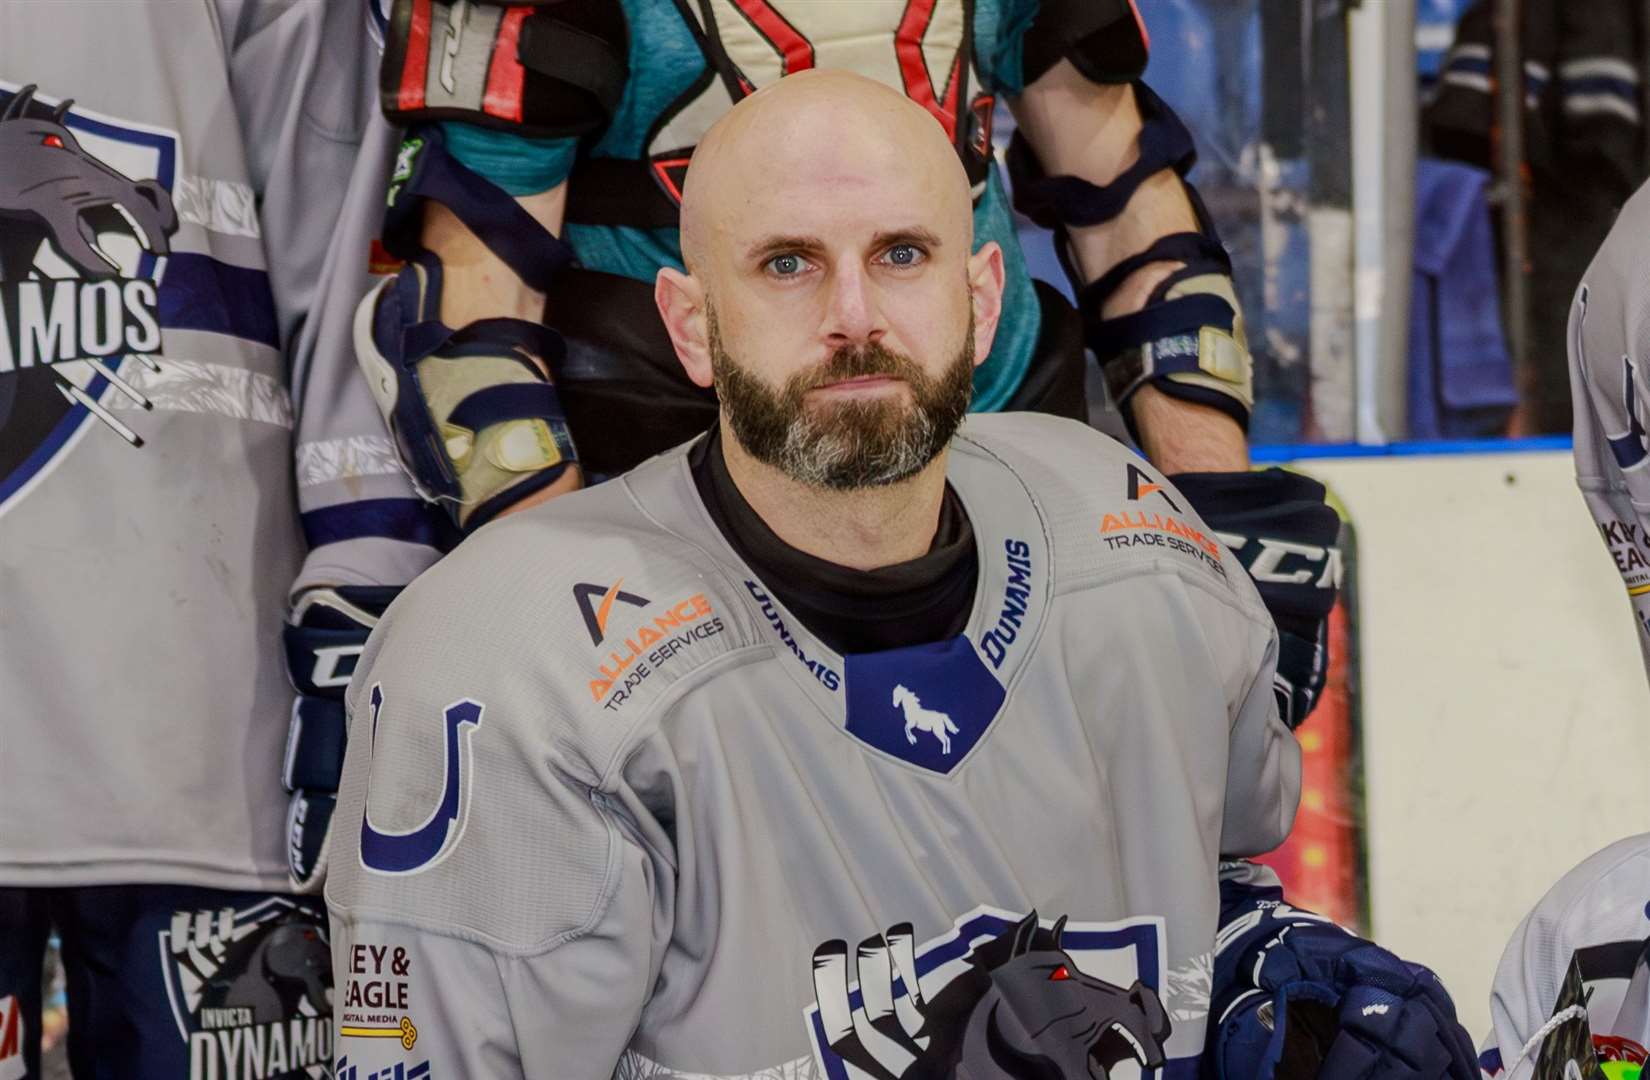 Head coach Karl Lennon scored and assisted a goal on Sunday for the Mos Picture: David Trevallion